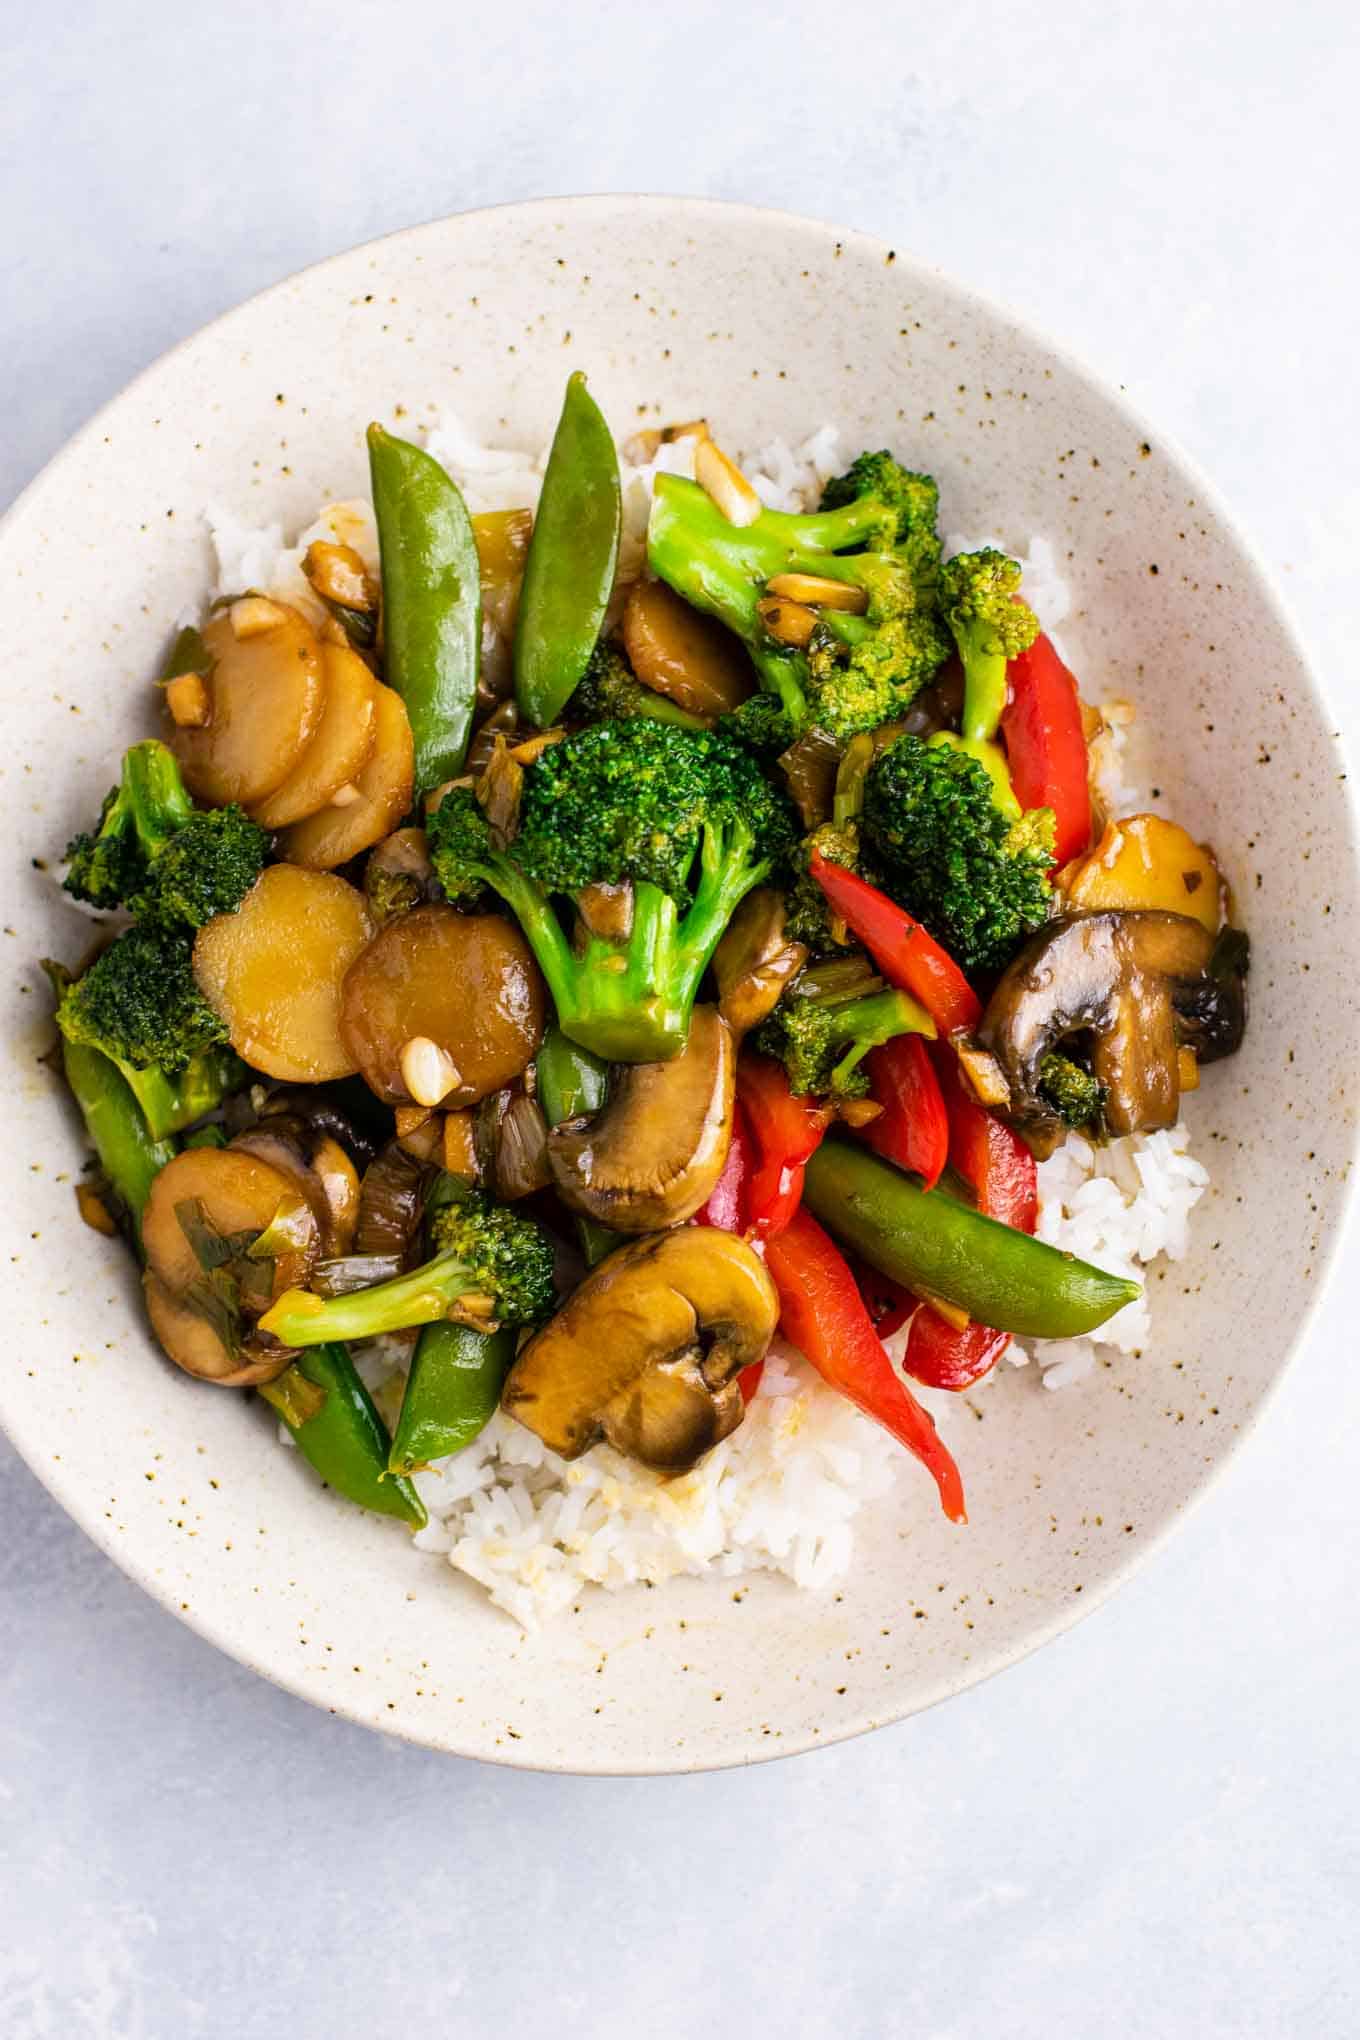 a bowl of stir fry vegetables over white rice